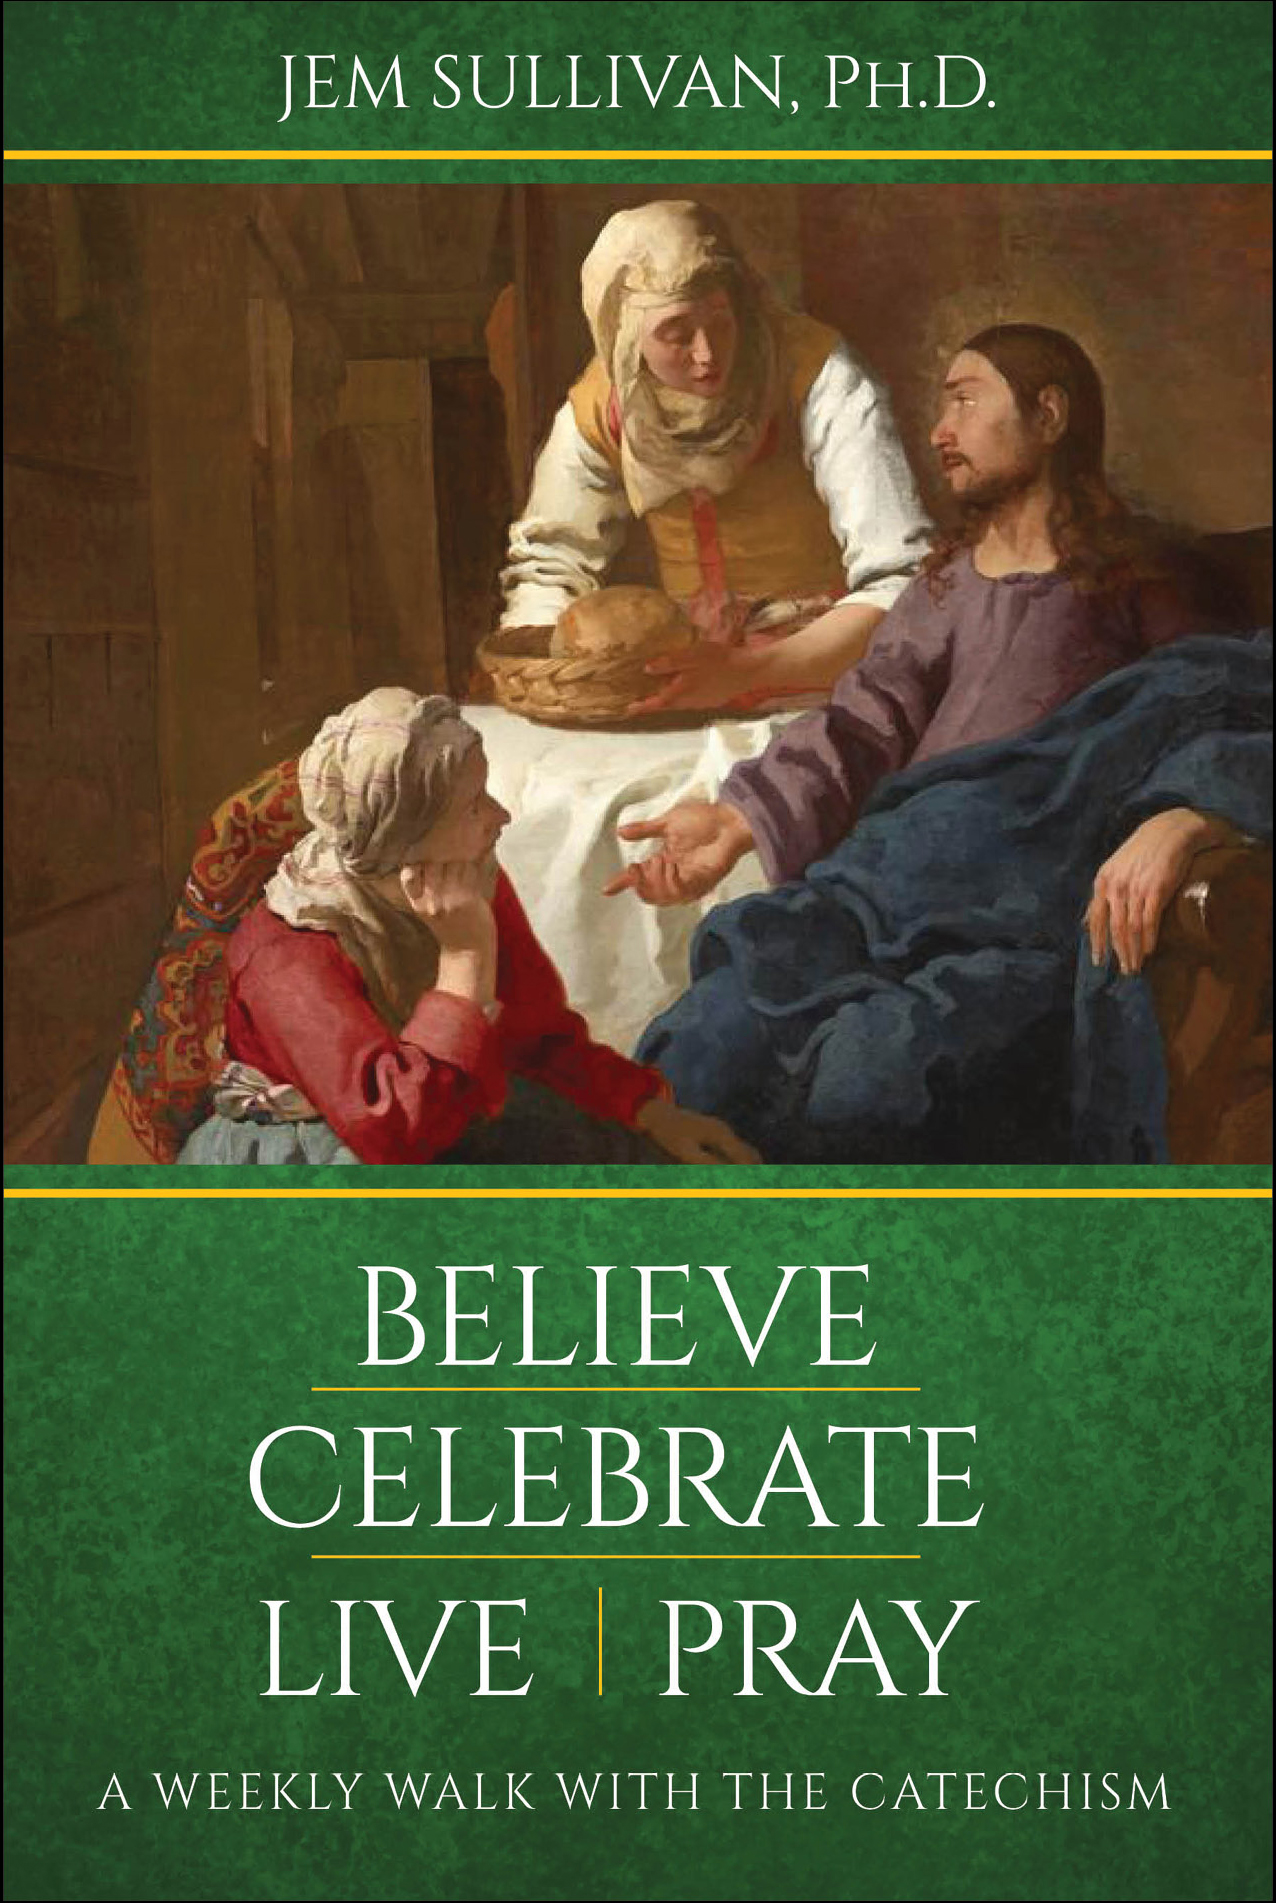 Believe Celebrate Live Pray  A Weekly Walk with the Catechism / Jem Sullivan PhD